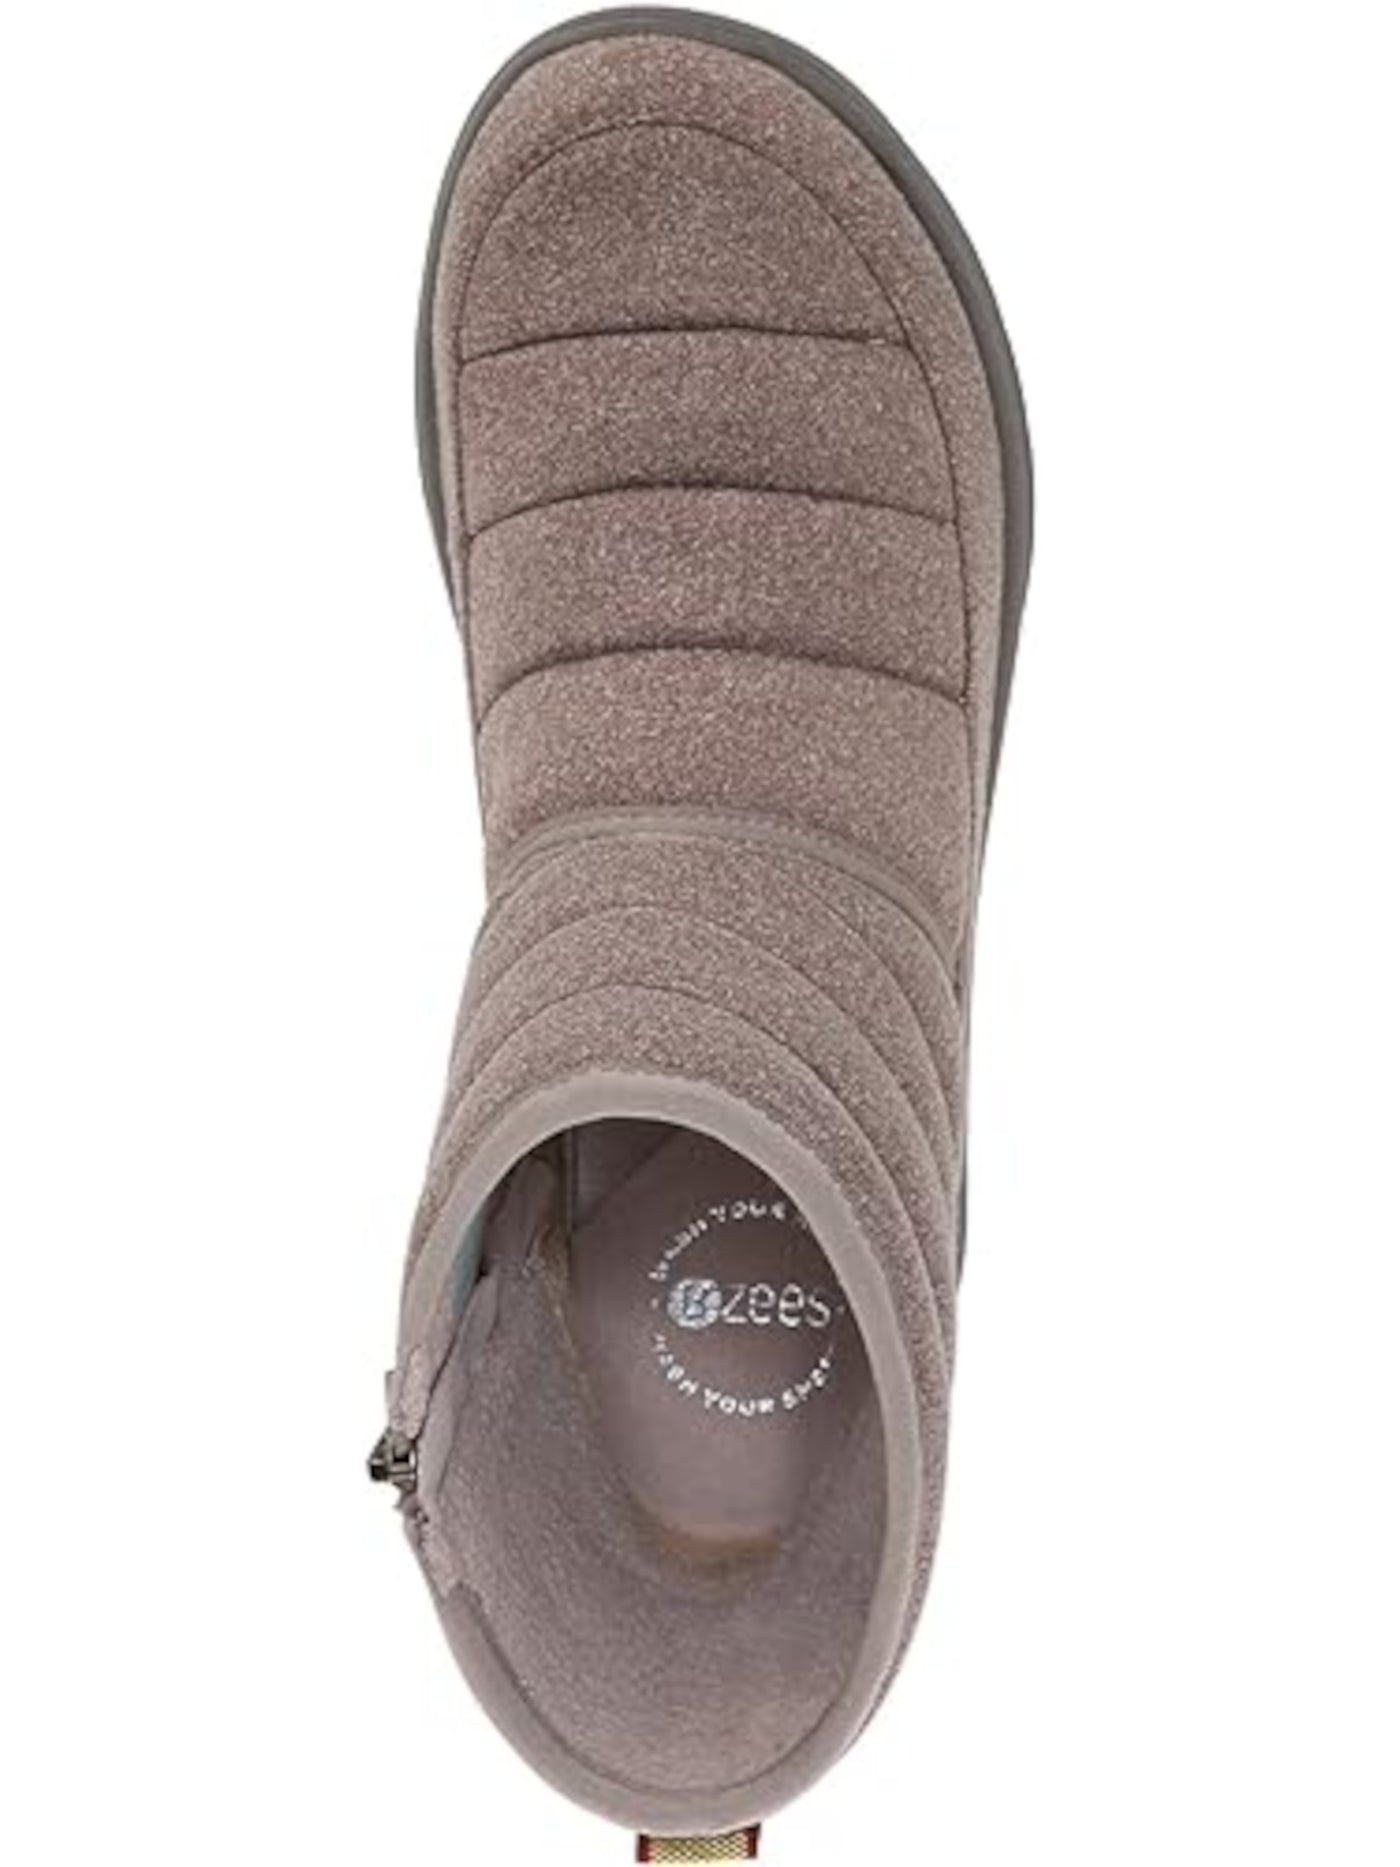 BZEES Womens Beige Arch Support Odor Control Glacier Round Toe Wedge Zip-Up Booties 6 M